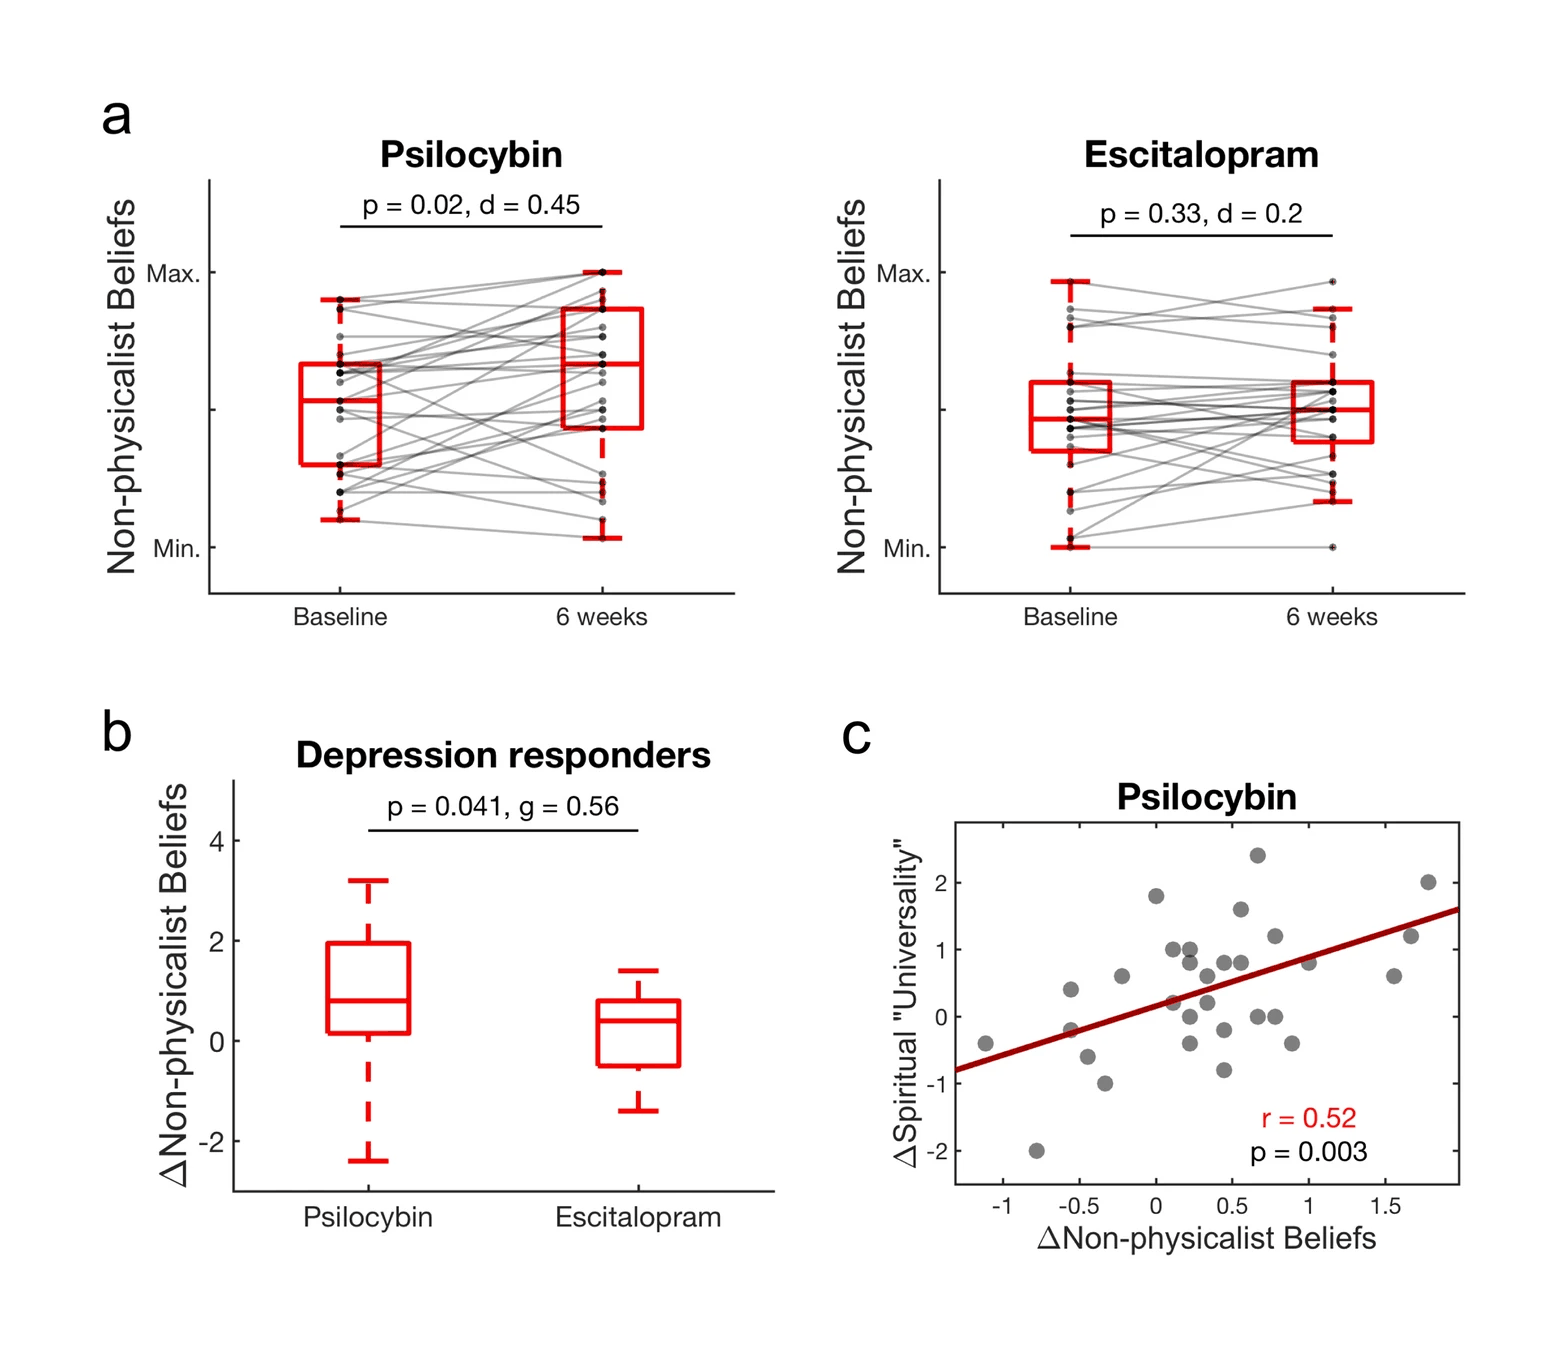 Figure 5: Consistent shifts away from physicalism after psilocybin therapy for depression: (a) statistically-significant shifts away from hard physicalism were only seen for psilocybin and not the escitalopram condition at the 6 week endpoint versus baseline (Bonferroni-corrected; p-values and Cohen’s d effect-sizes shown). (b) Greater belief-shifts in the predicted direction were found for treatment responders in the psilocybin condition versus responders in the escitalopram group (p value and Hedges’ g effect size shown). (c) Shift in non-physicalist beliefs were statistically-significantly associated with increases in ‘Spiritual Universality’ (STS scale) at the 6-week endpoint versus baseline, and this was specific for the psilocybin group (ie. it was not seen in the escitalopram group).